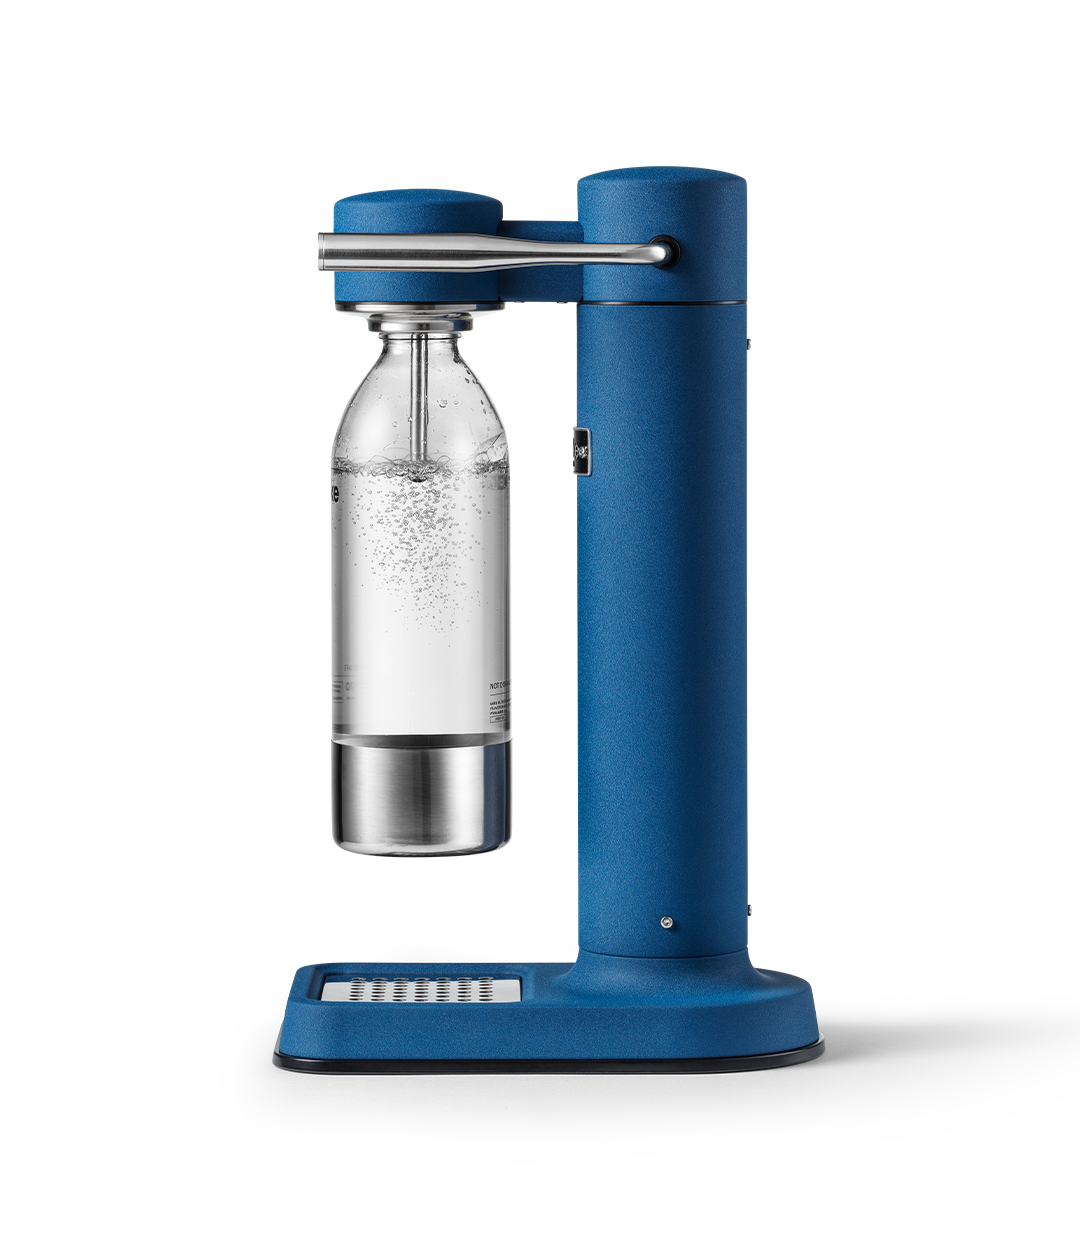 Aarke Carbonator 3 in Cobalt Blue. Side view with bottle attached.